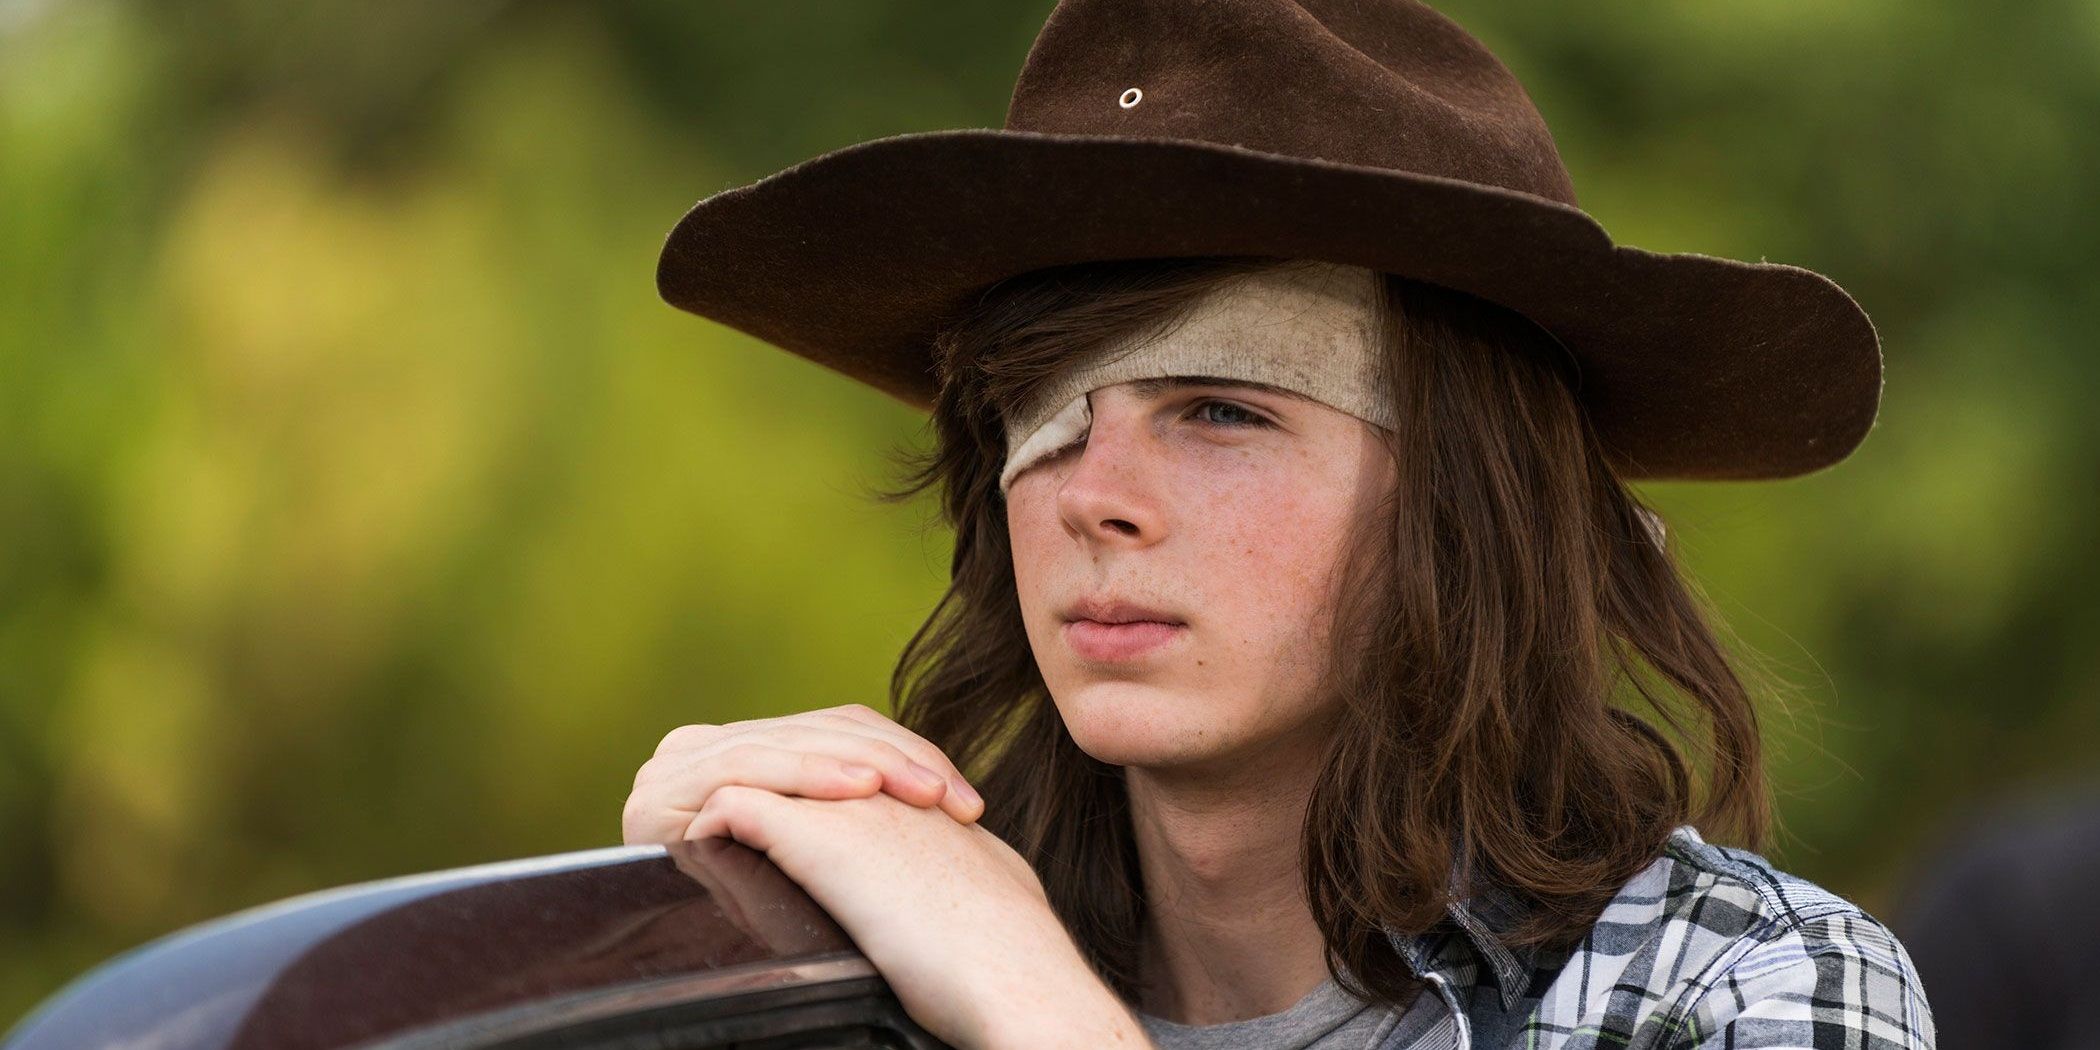 Carl Grimes looking to the distance on The Walking Dead